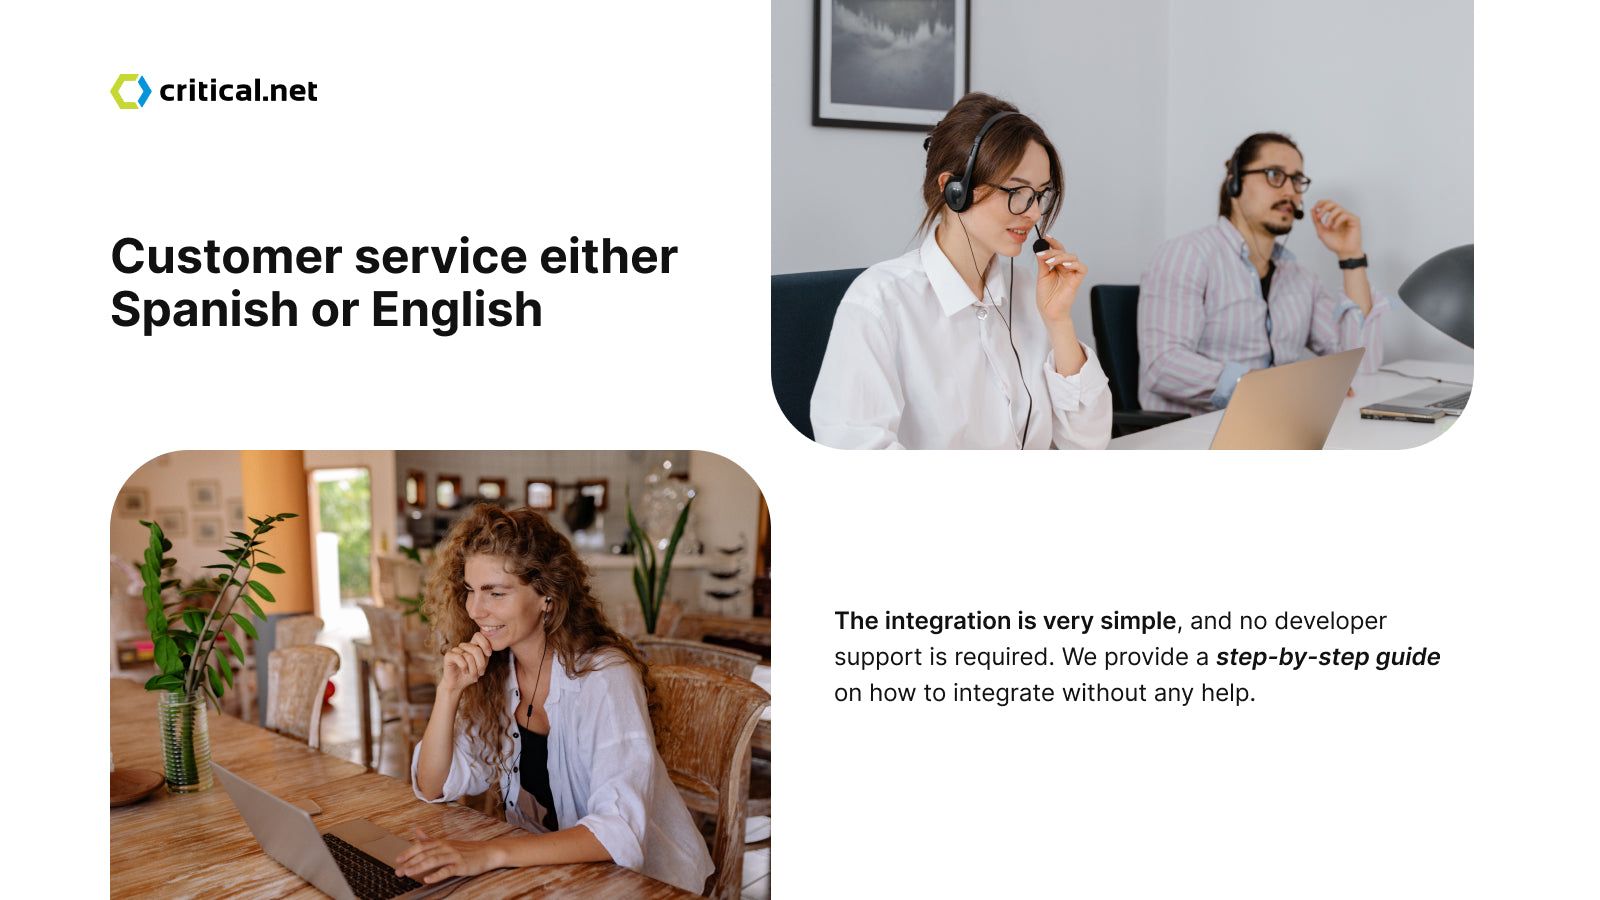 Customer service either Spanish or English